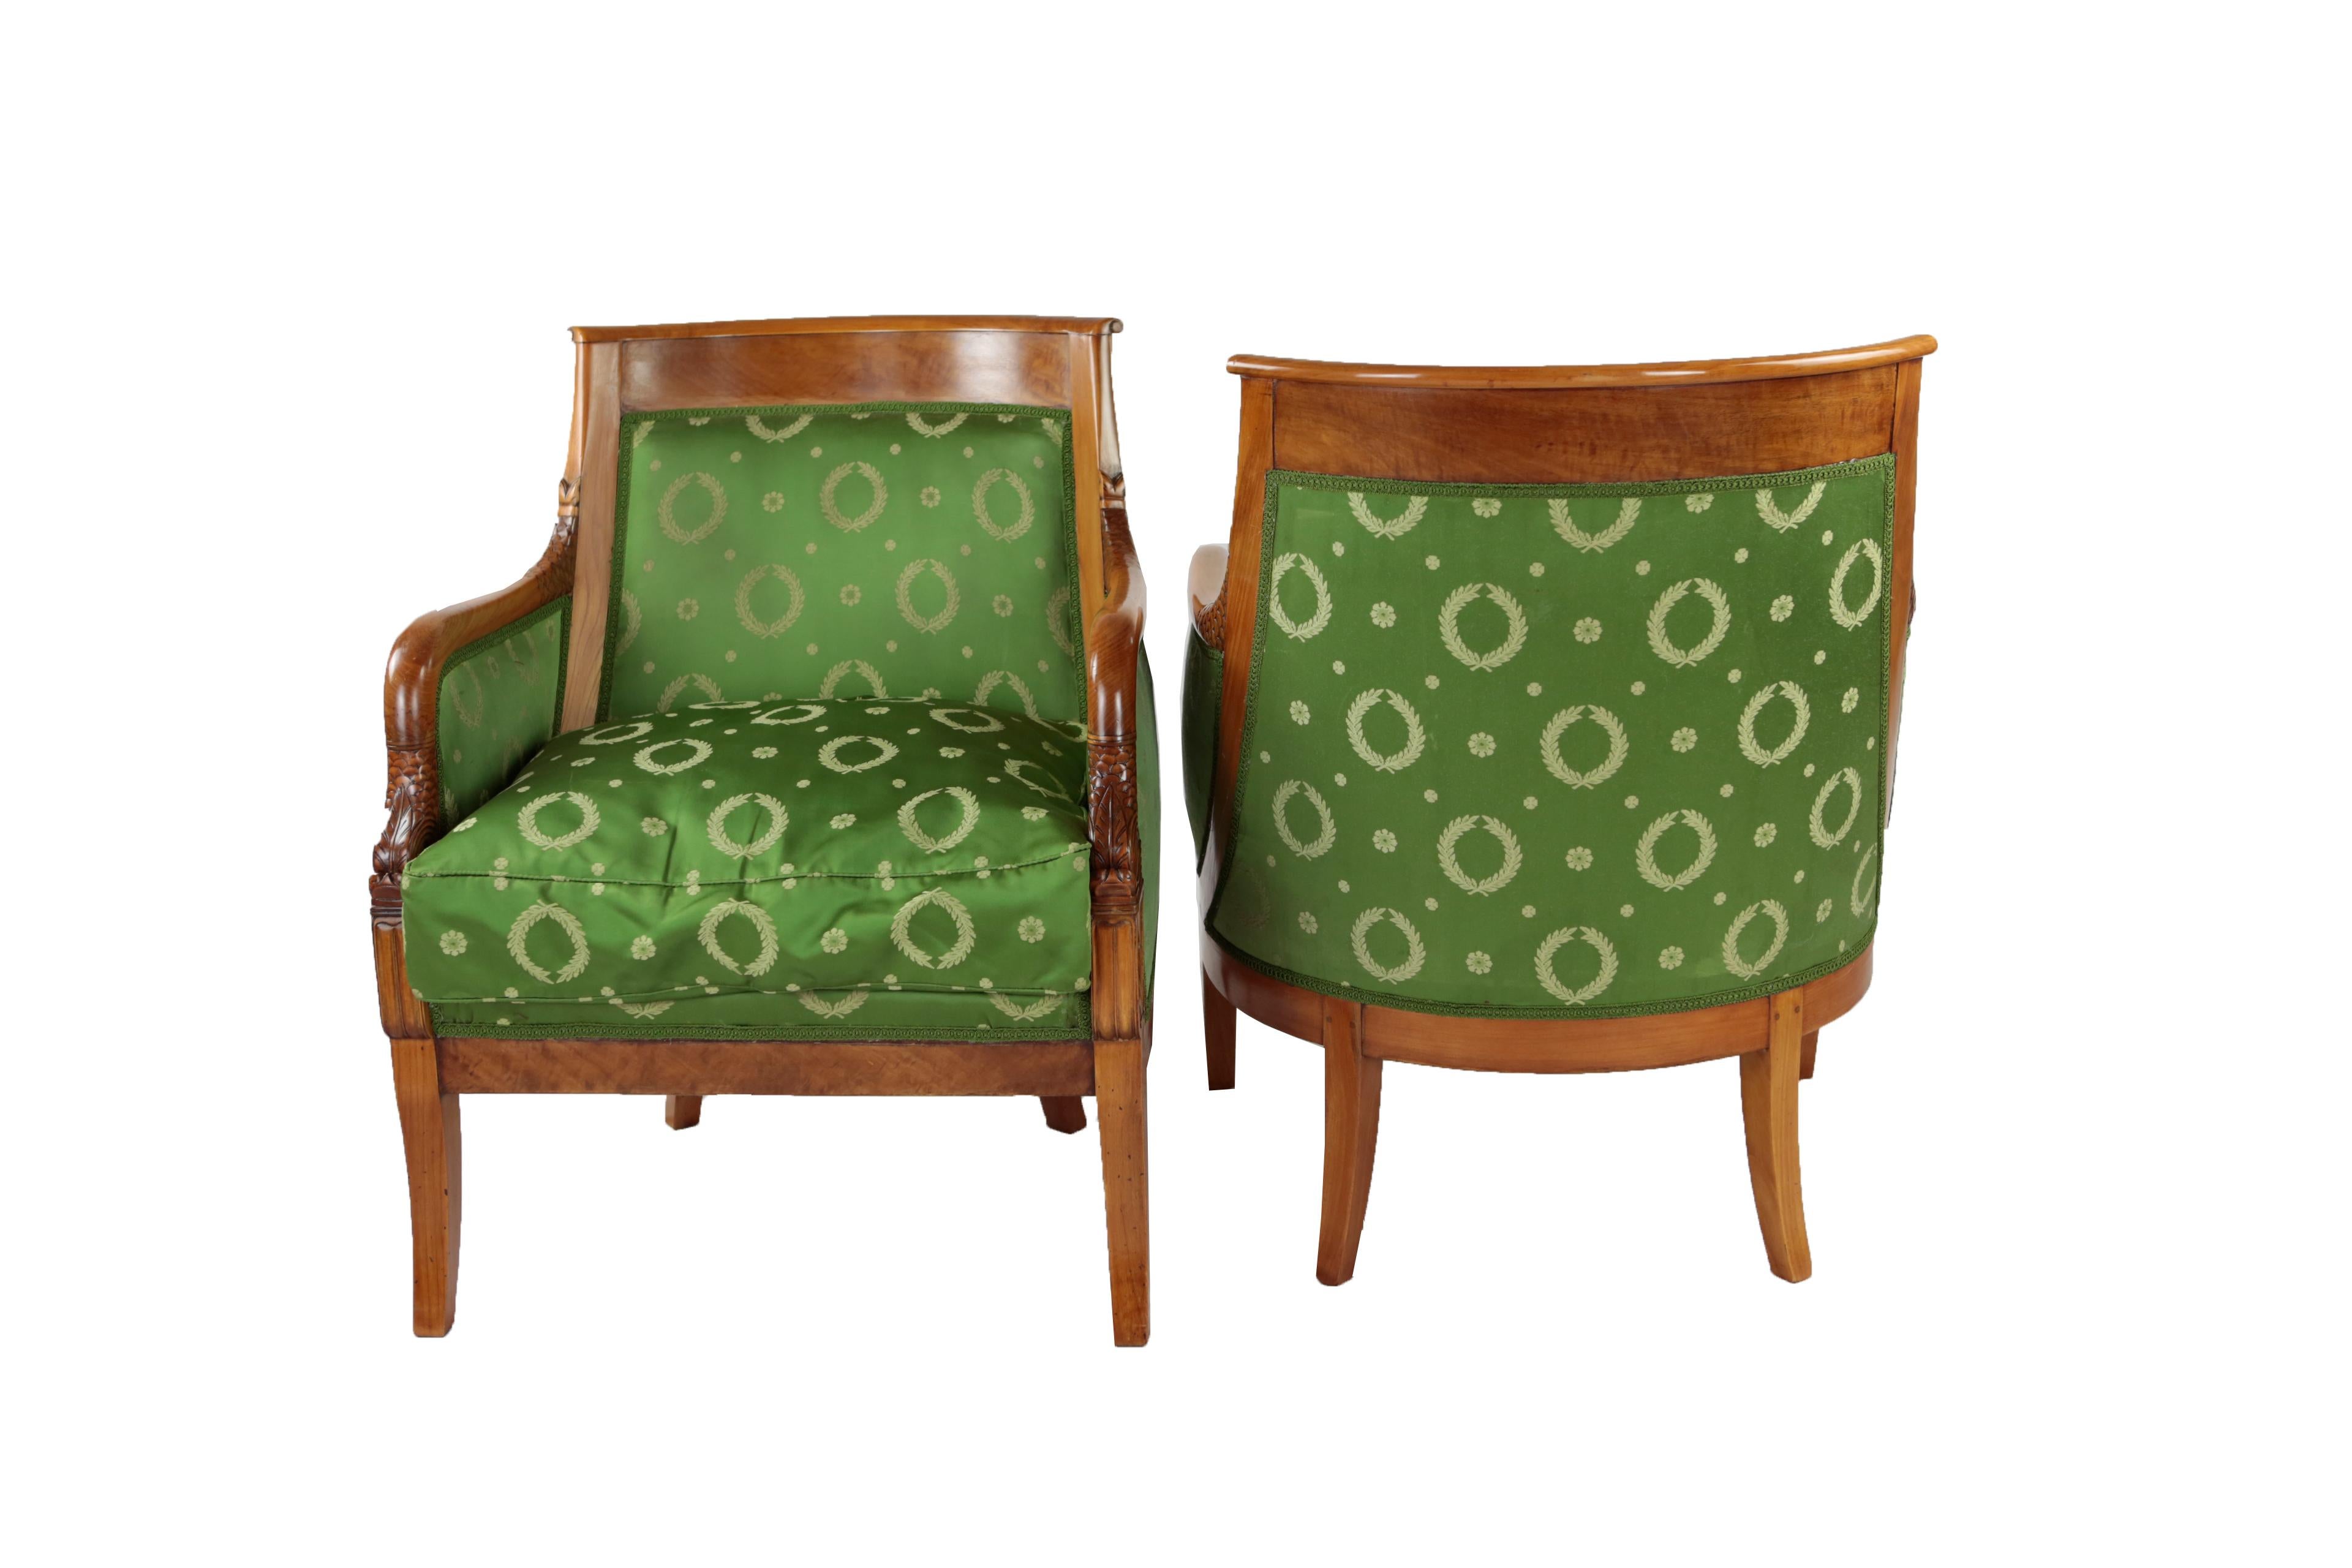 French Late 19th Century Pair of Armchairs, Empire Style, France, Cherry and Maplewood For Sale